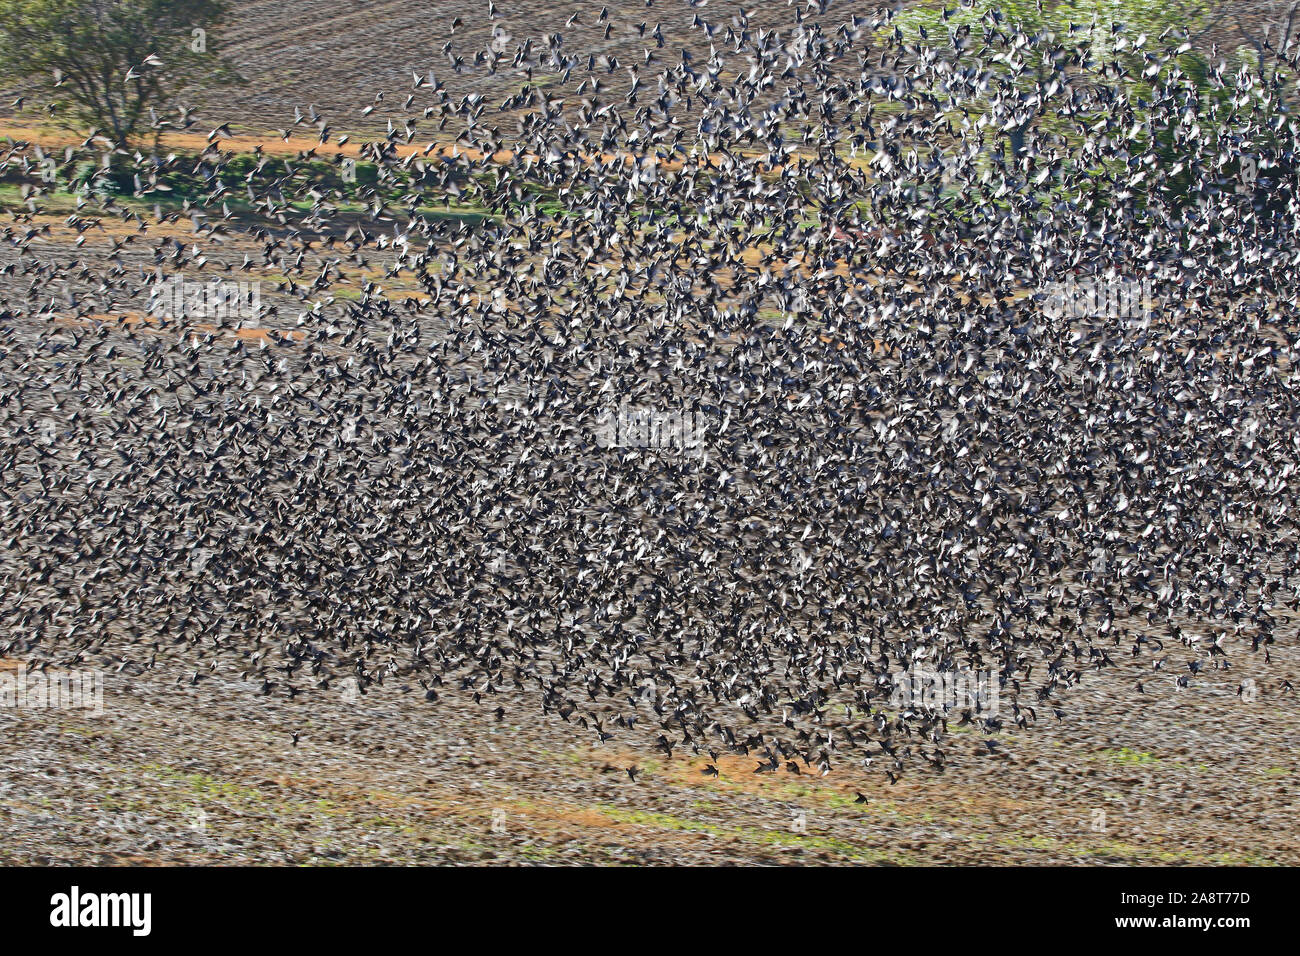 abstract art shot as if inside an enormous flock or murmuration of starlings Latin sturnus vulgaris flying together above a field in rural Italy Stock Photo